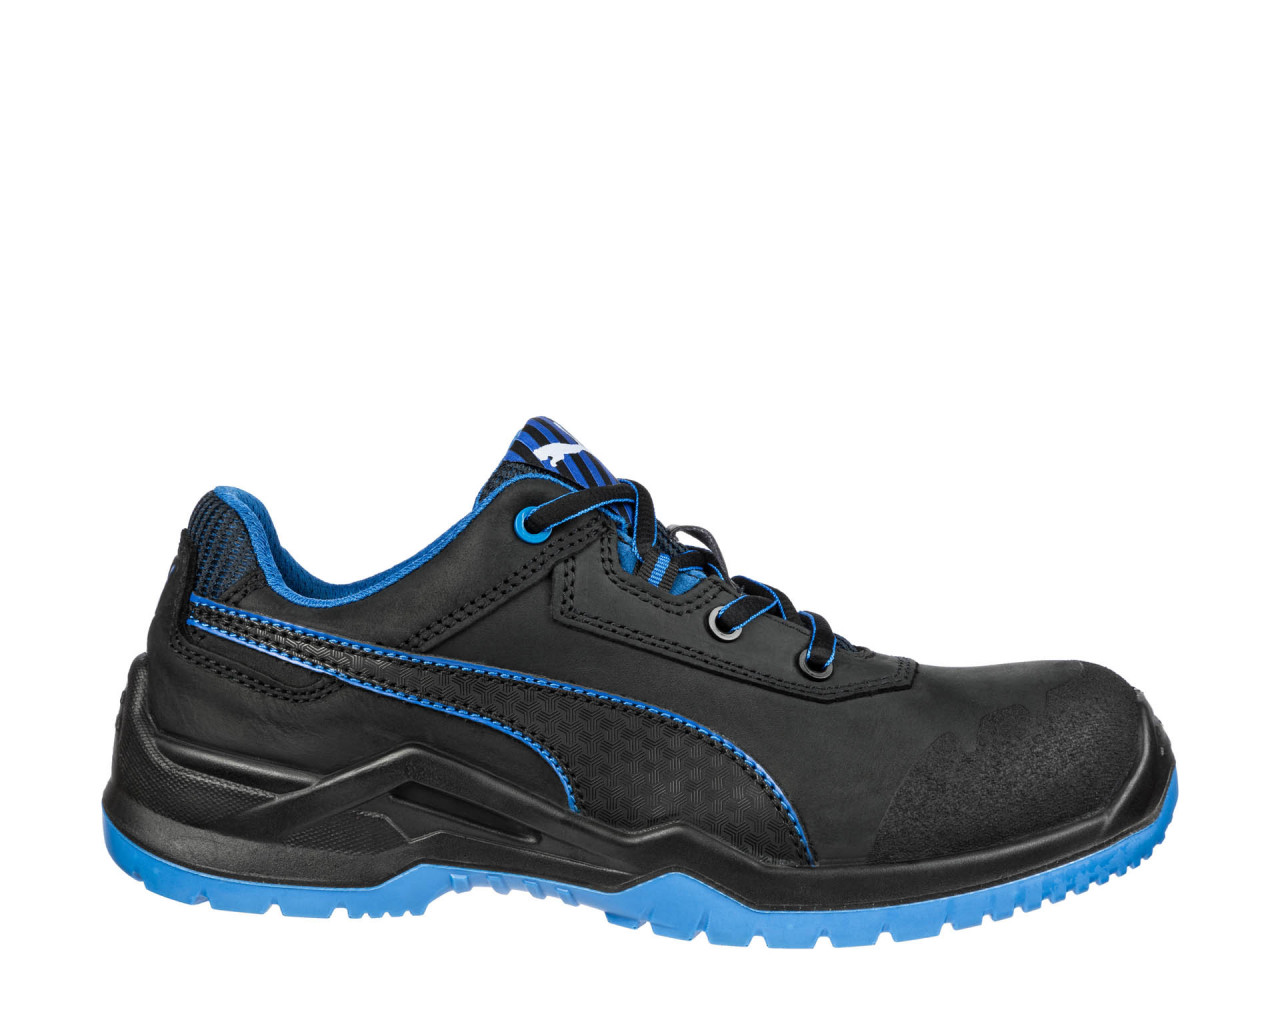 LOW SRC SAFETY shoes Puma PUMA safety ESD BLUE S3 English Safety | ARGON